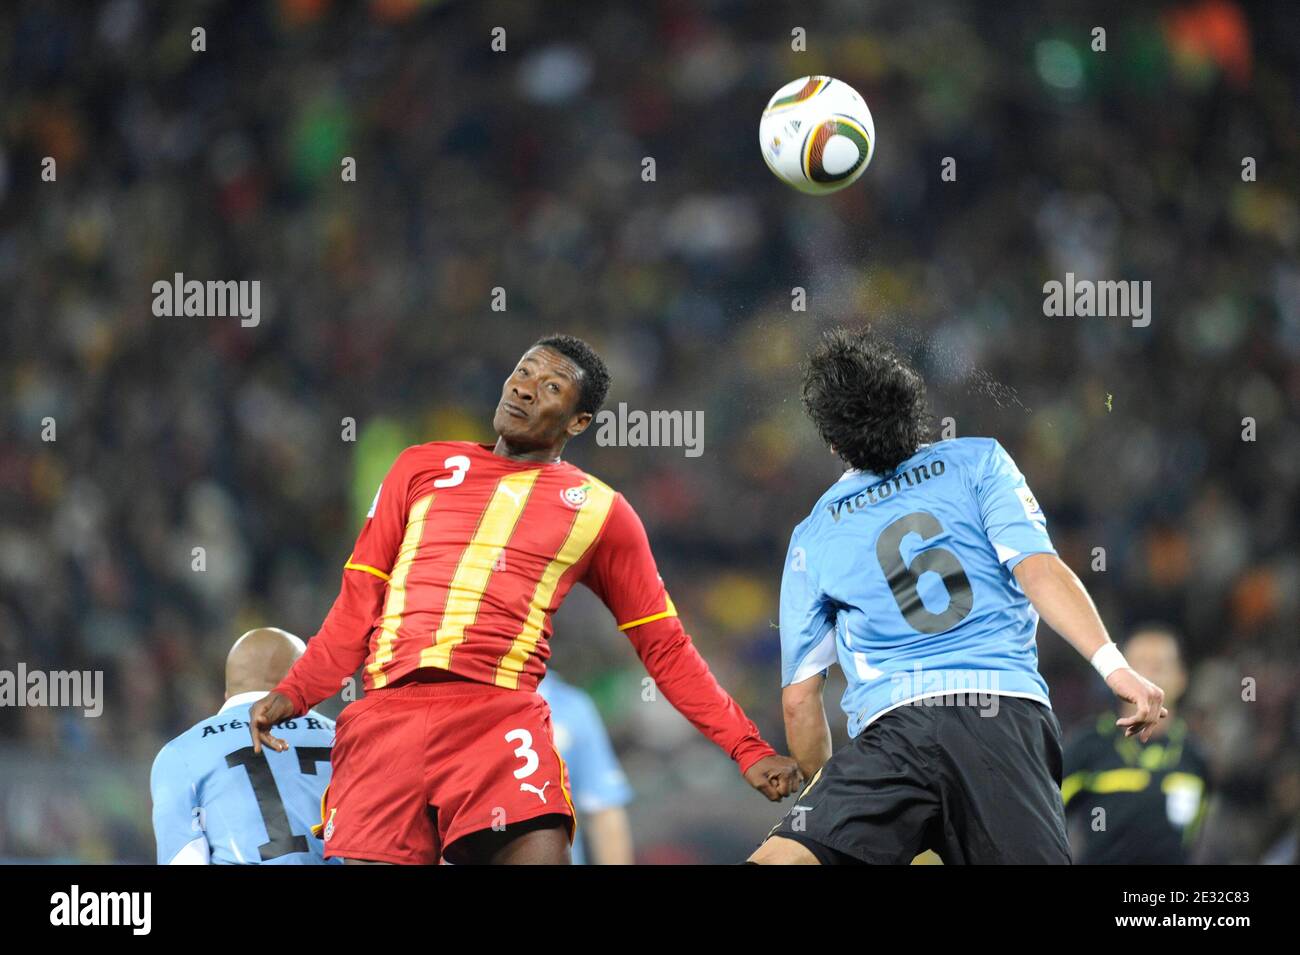 Ghana's Asamoah Gyan battles for the ball with Uruguay's Mauricio Victorino during the 2010 FIFA World Cup South Africa, Quarter Final, Soccer match, Ghana vs Uruguay at Soccer City football stadium in Johannesburg, South Africa on July 2nd, 2010. Uruguay won 0-0 (5p to 4). Photo by Henri Szwarc/ABACAPRESS.COM Stock Photo